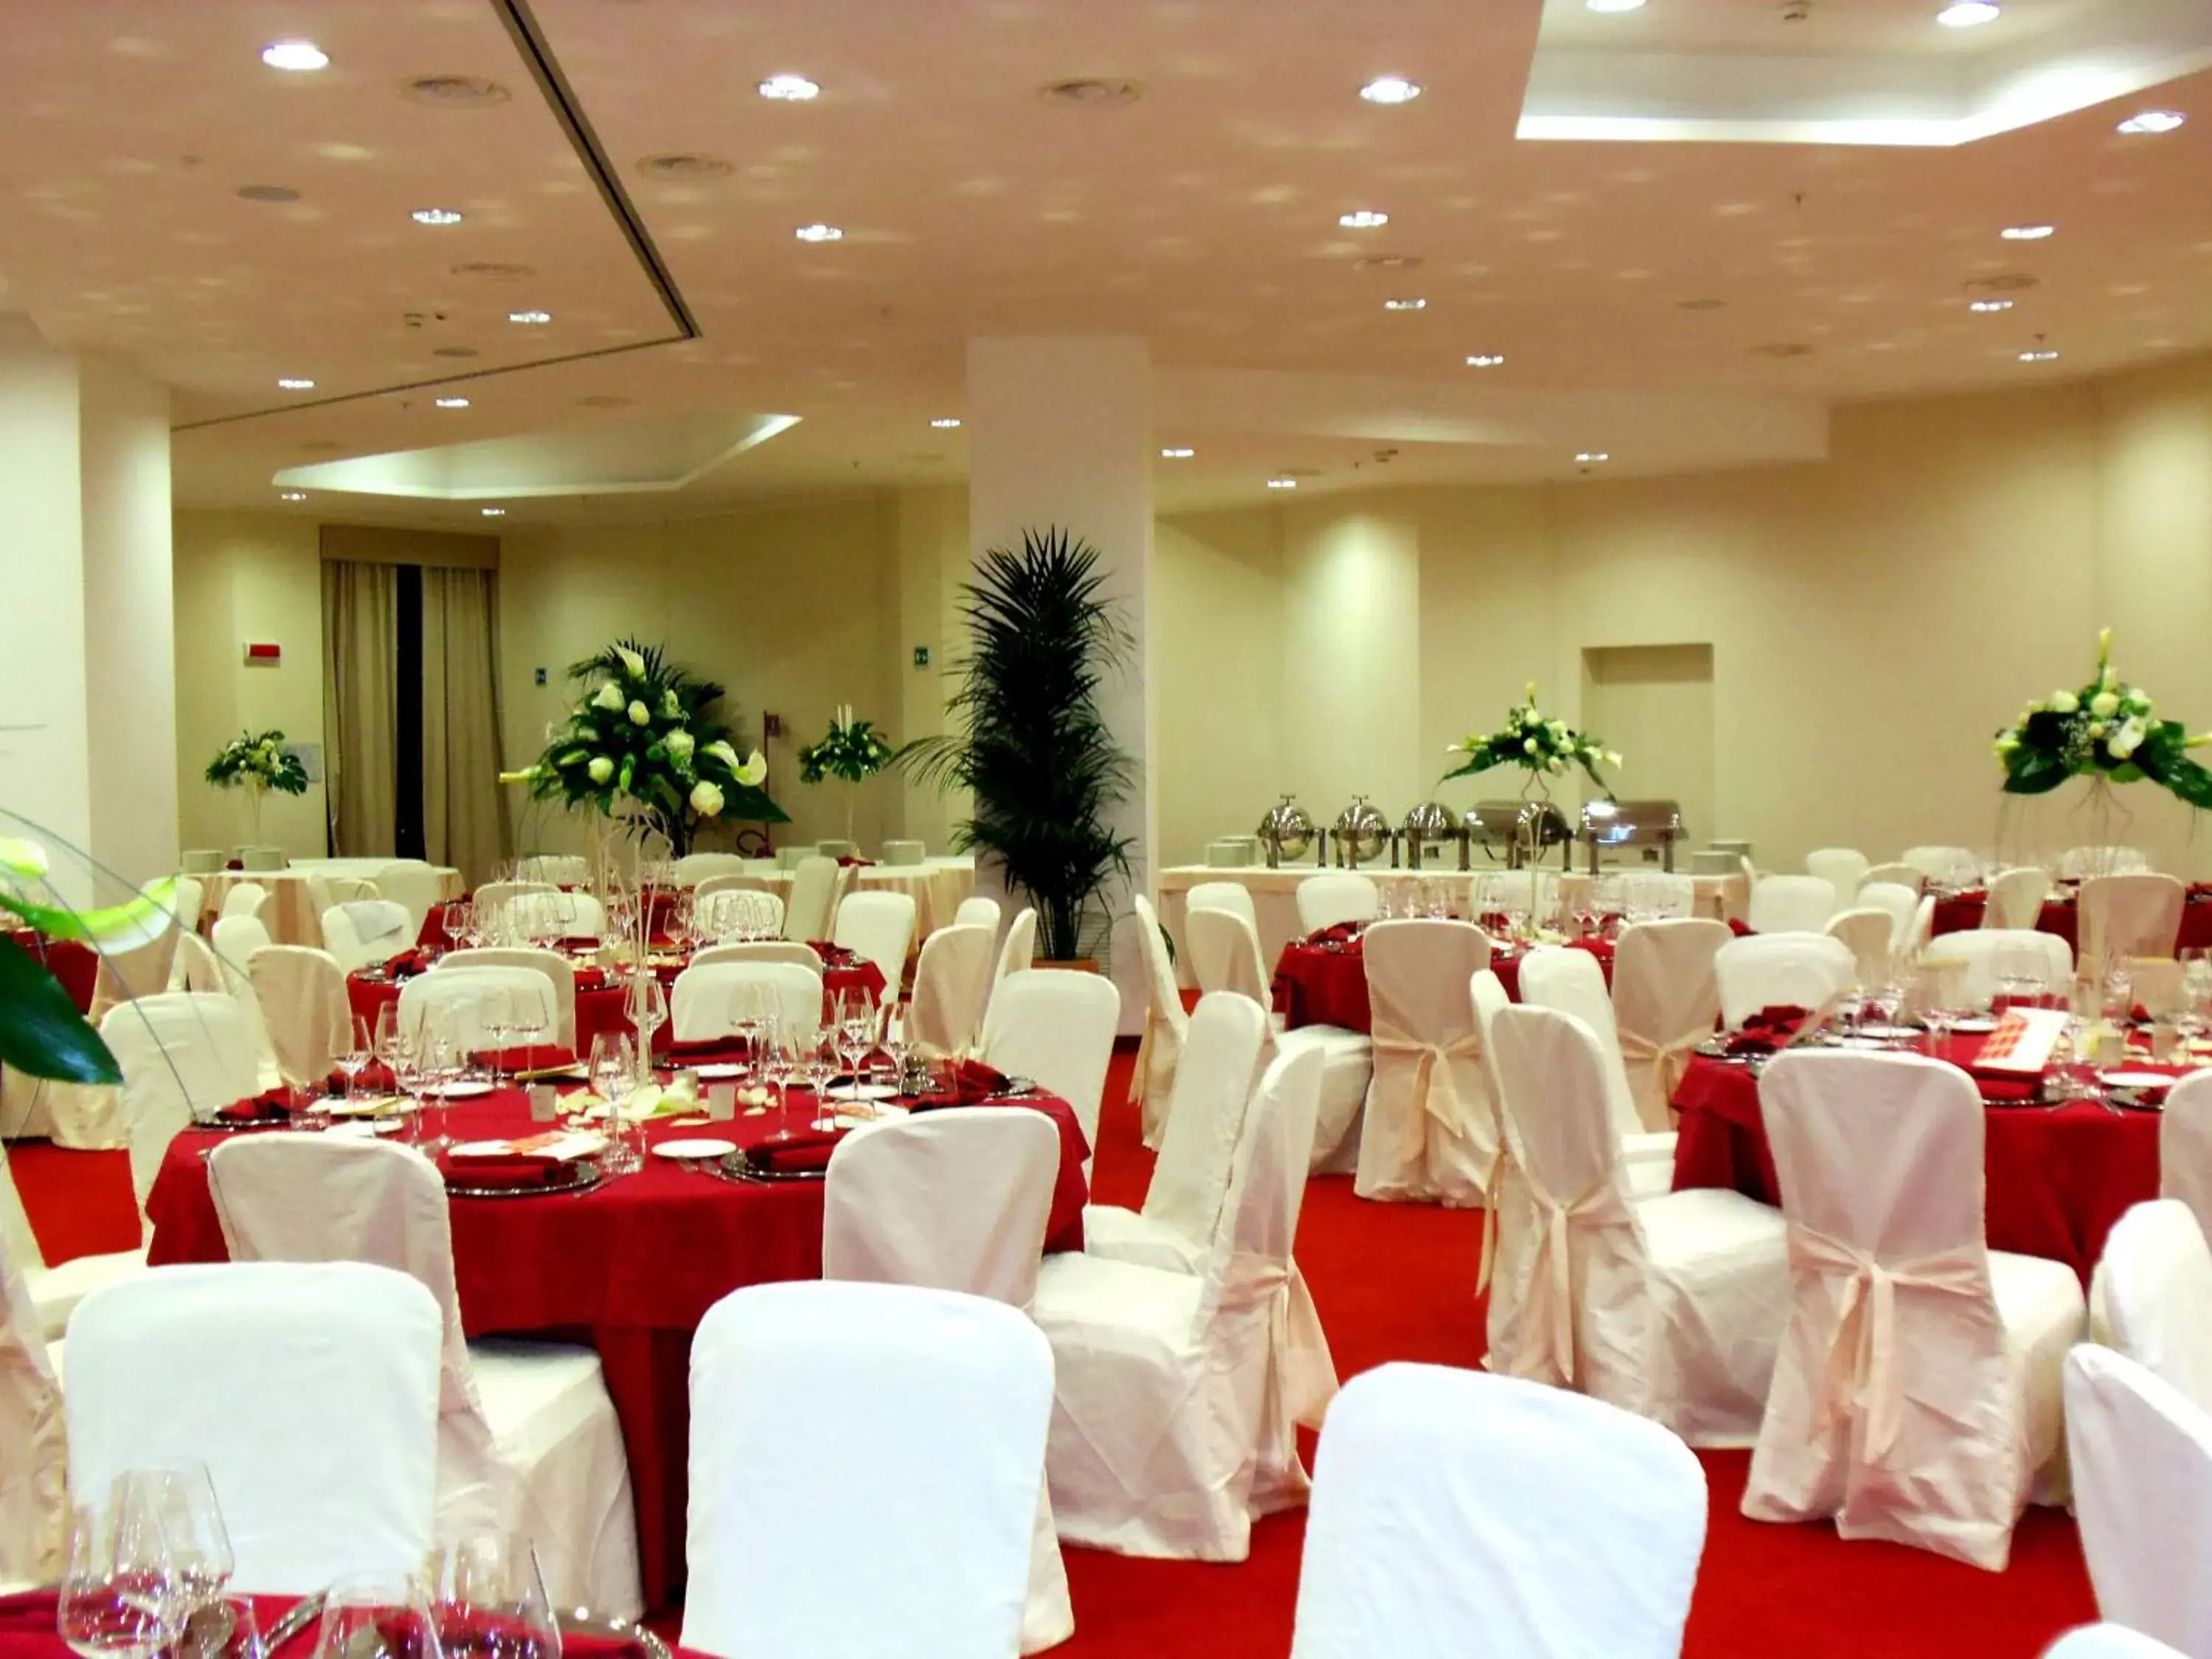 Meeting/conference room, Banquet Facilities in Hilton Garden Inn Lecce